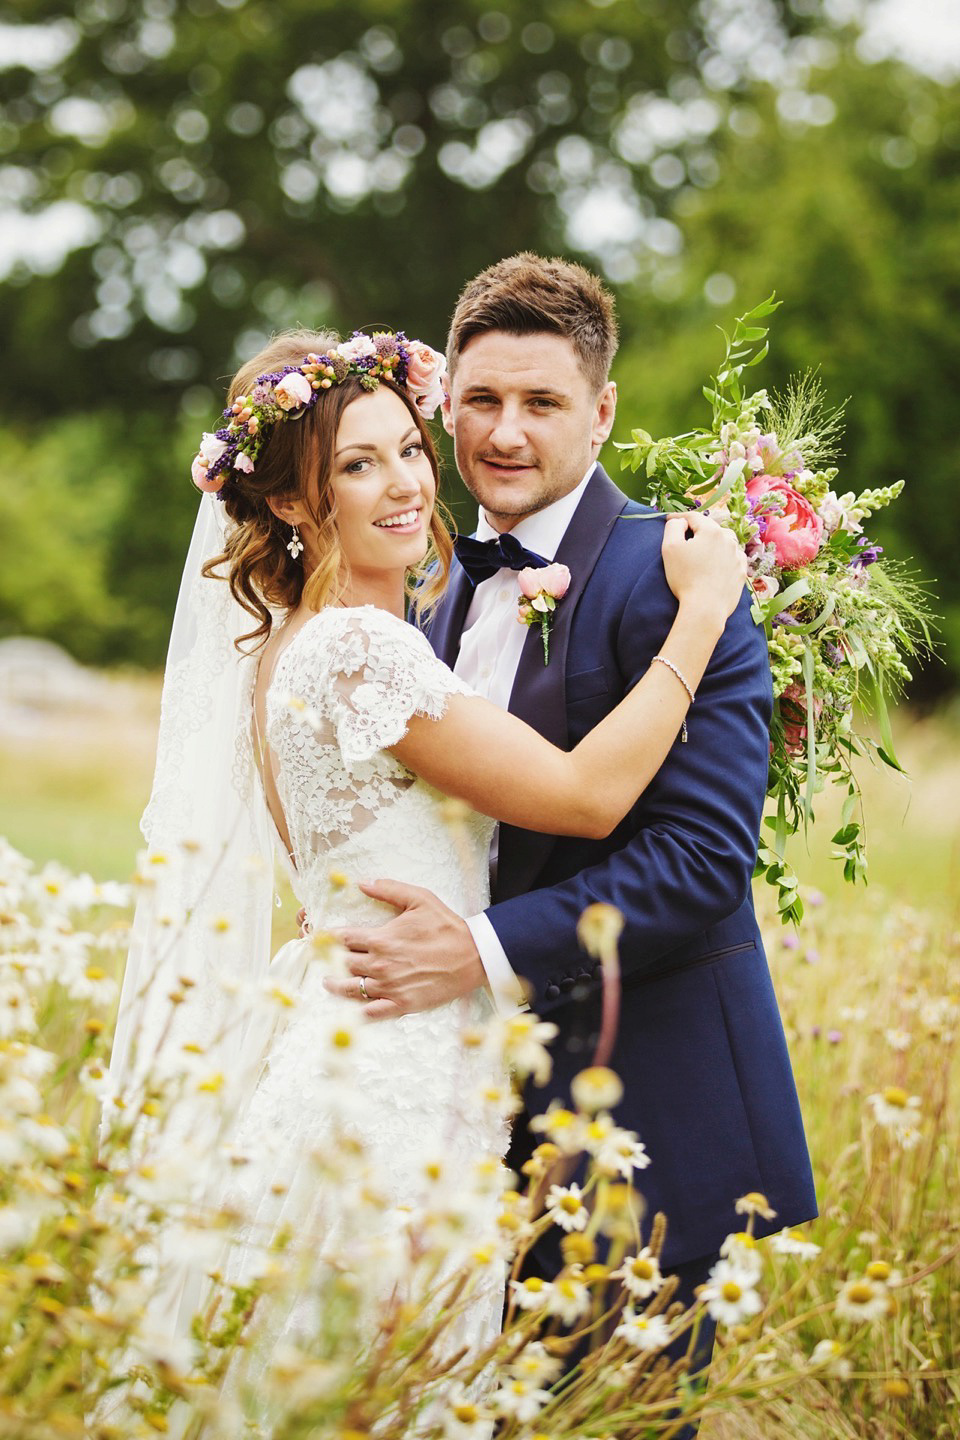 An Intuzuri Gown for a Black Tie meets Modern Boho Wedding. Photography by Gemma Williams.